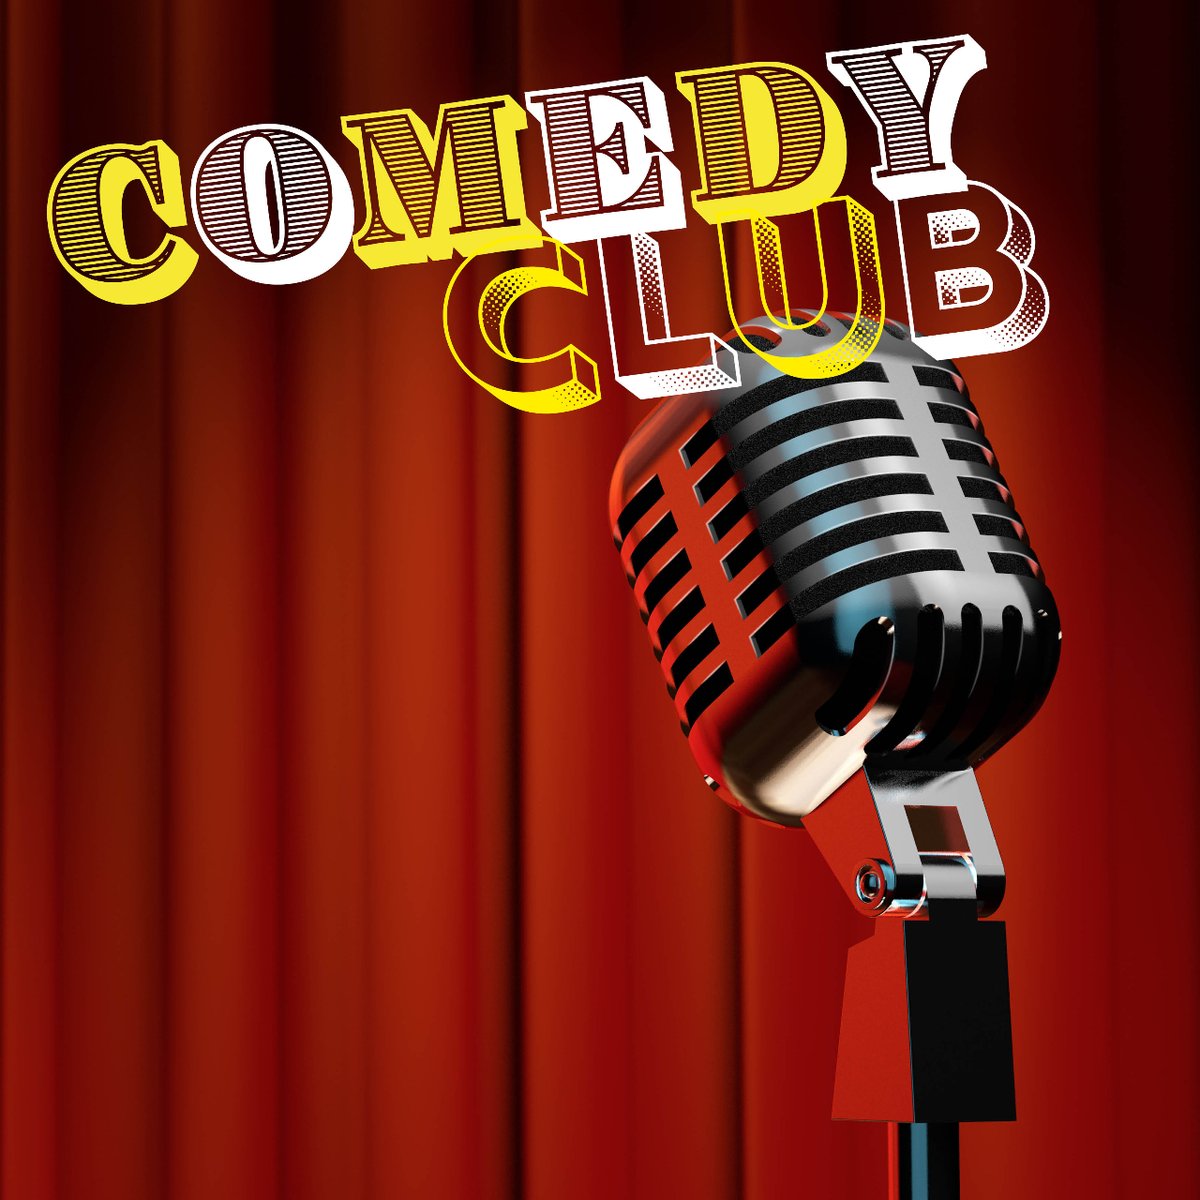 We hope you all had a blast at Rosehill's Comedy Club last night! Let us know how much you enjoyed it in the comments below. 🎤 The next Club night will be on Friday 19 July, and tickets are already on sale!  😄🎟️ #RosehillsComedyClub #SaveTheDate rosehilltheatre.co.uk/whats-on/roseh…